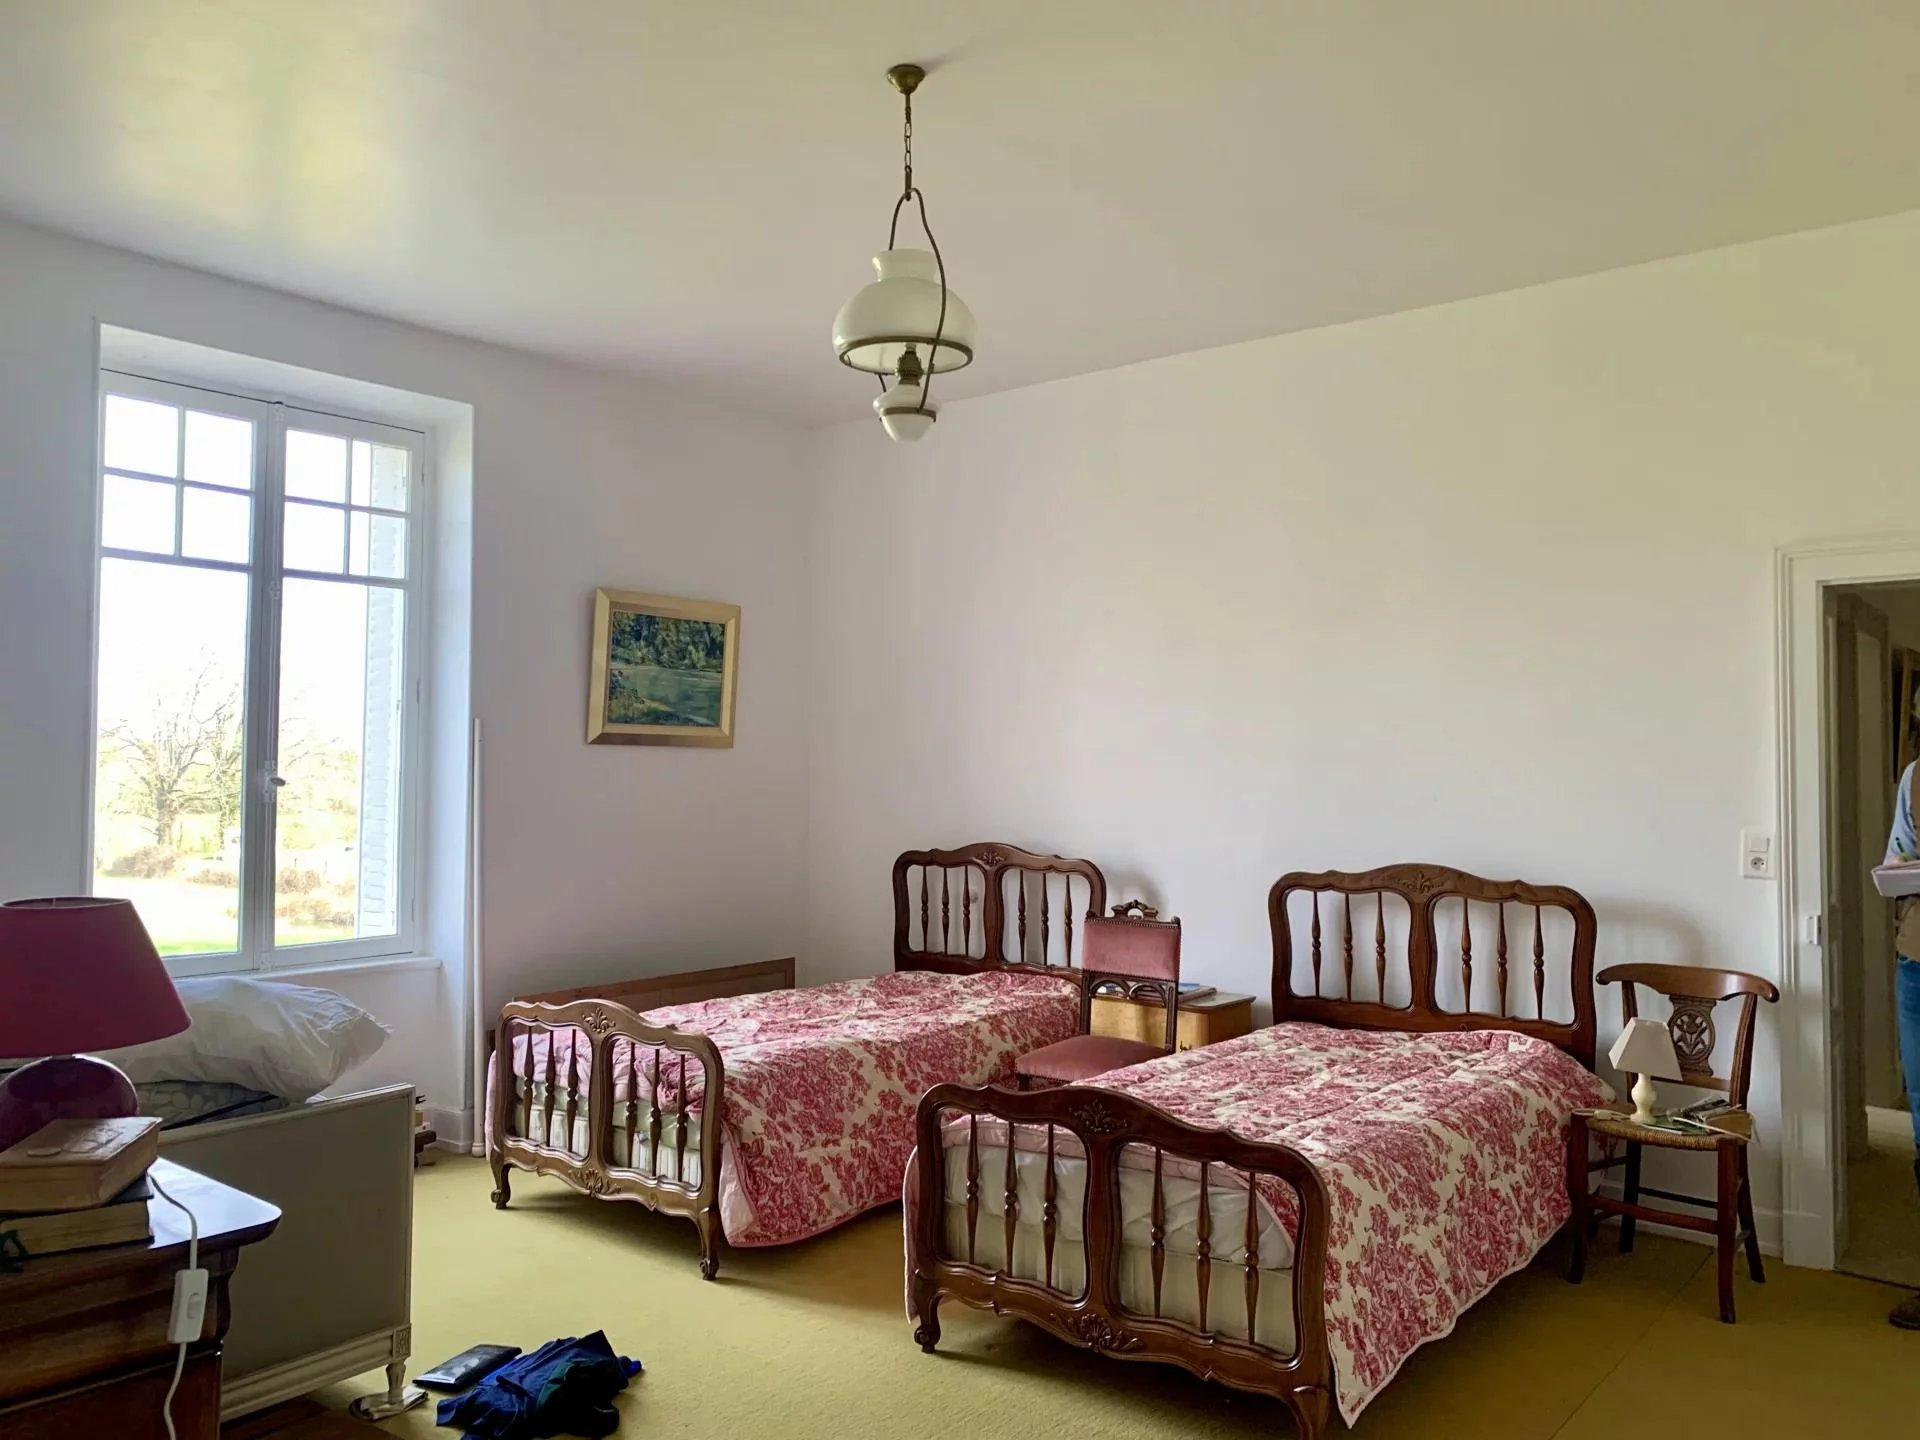 Sale Bed and breakfast - Neuvy St Sepulchre